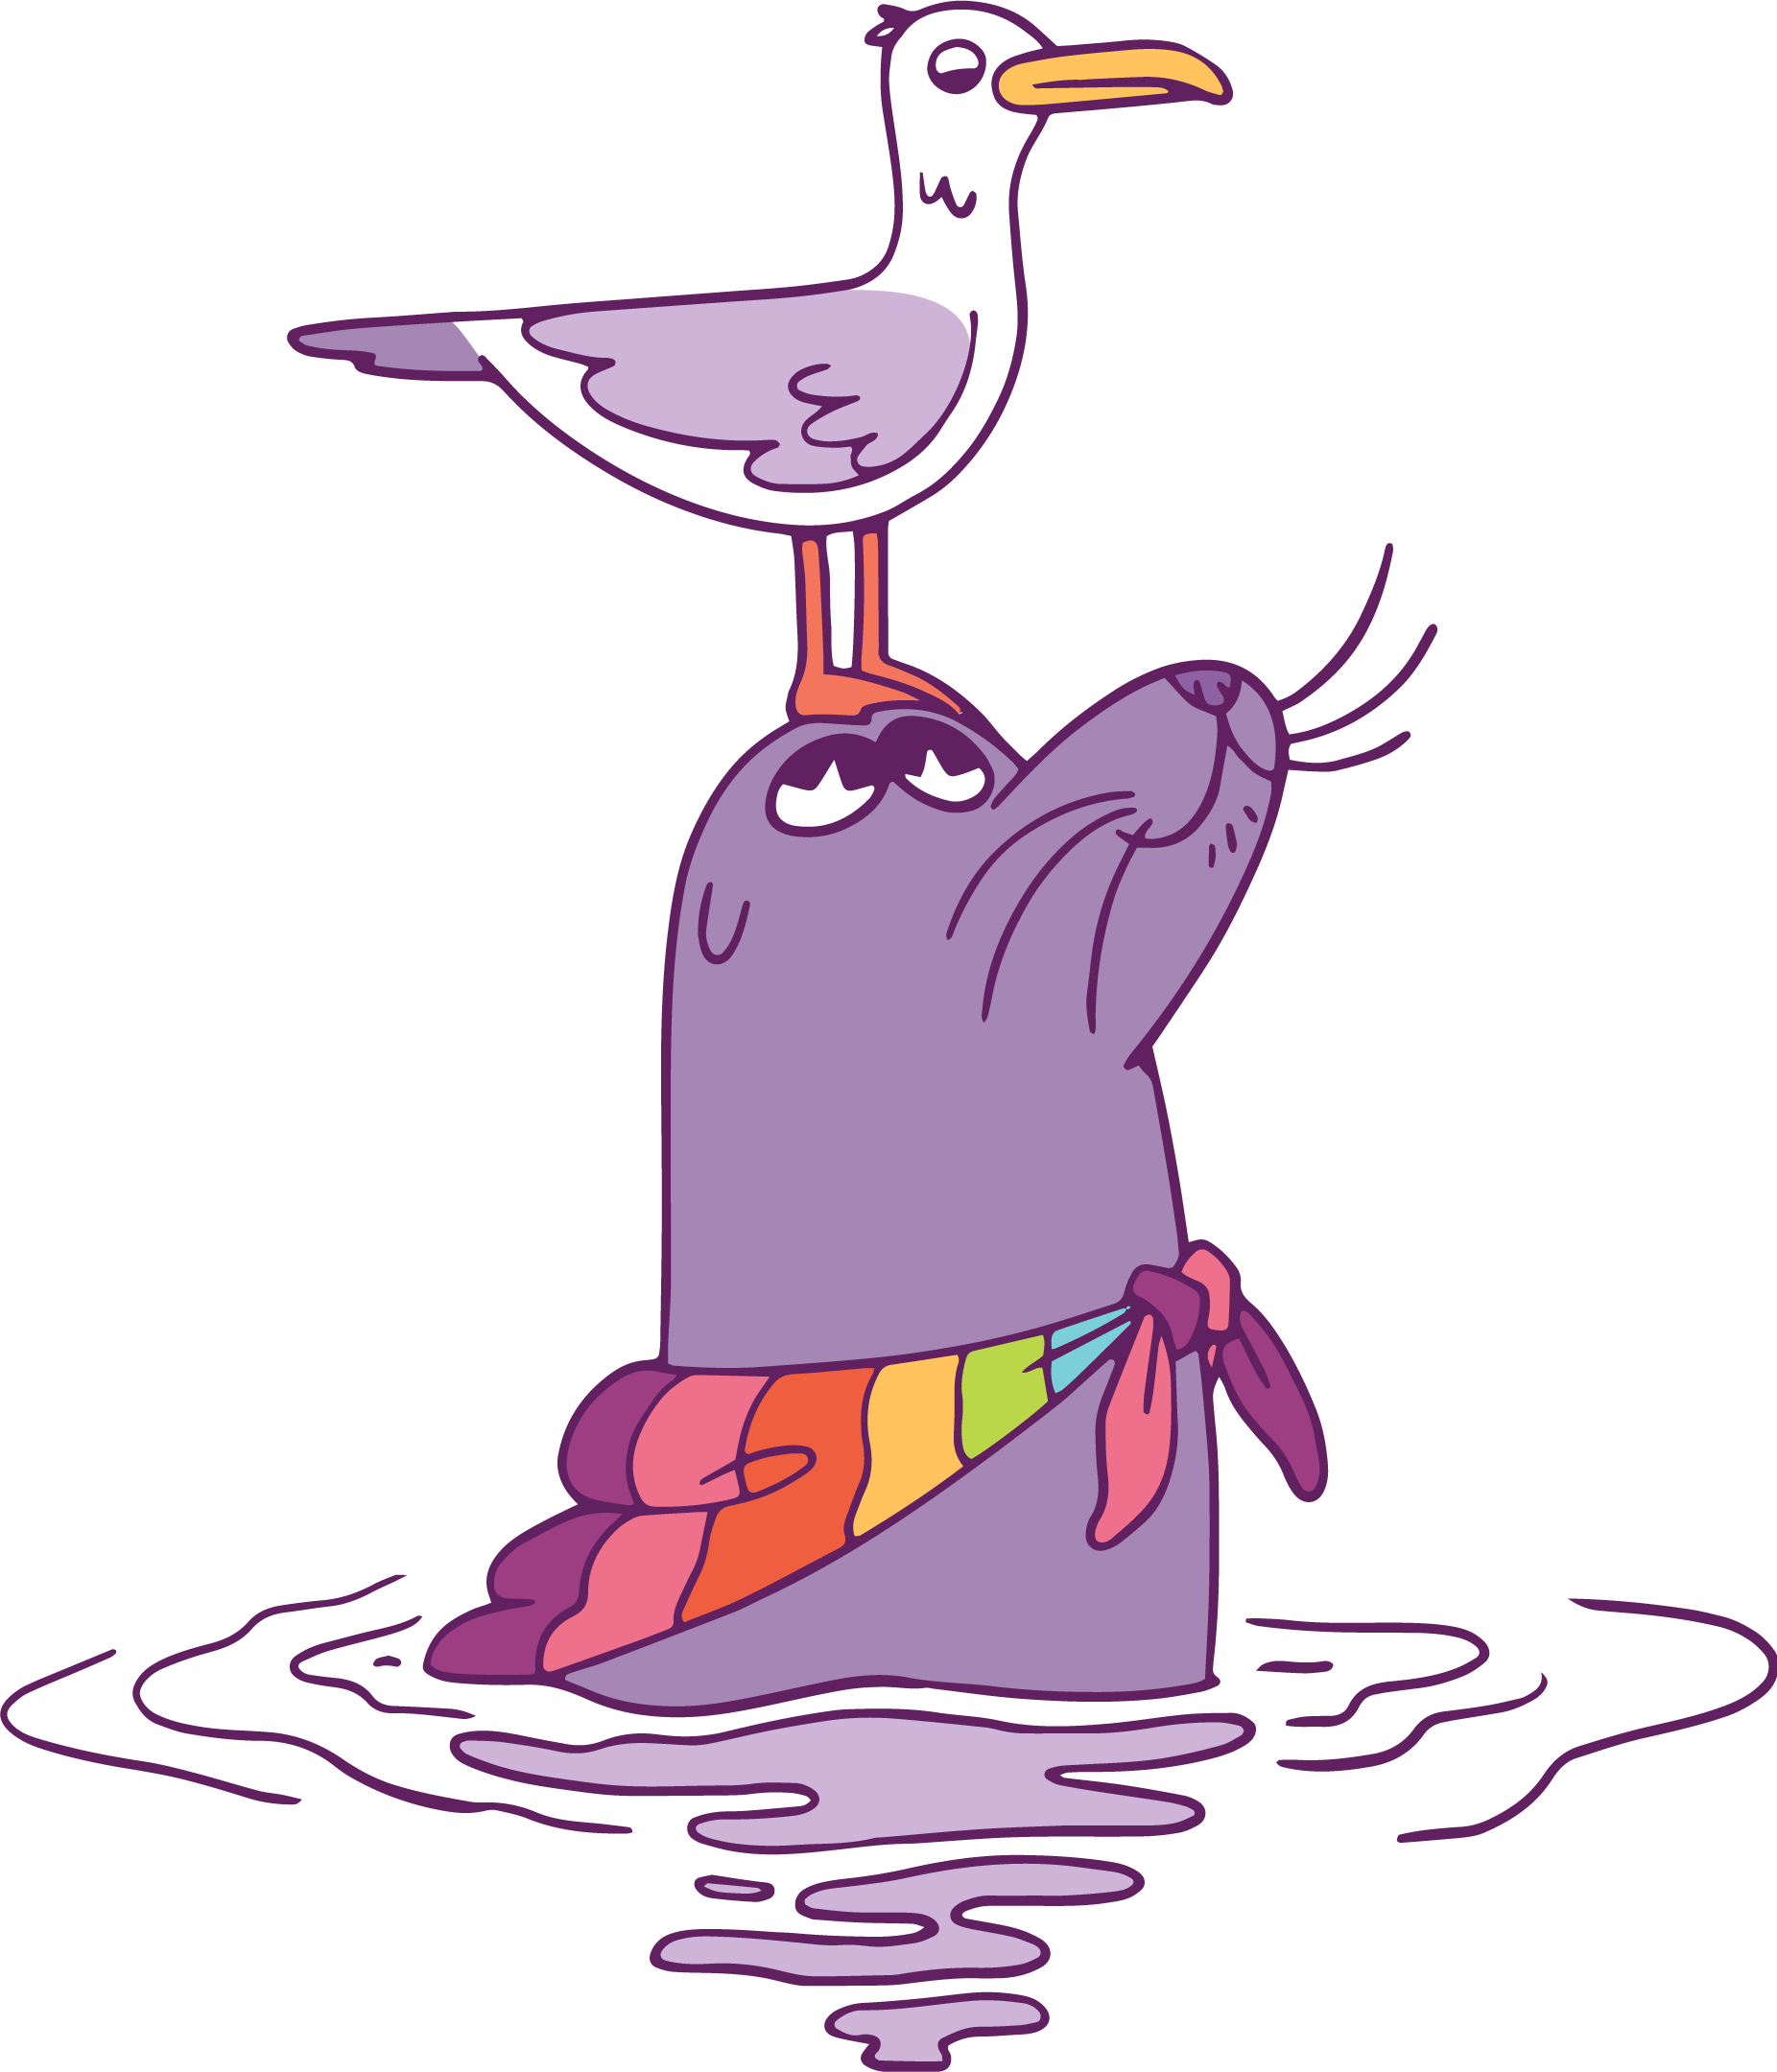 cartoons sea lion with a seagull on its head